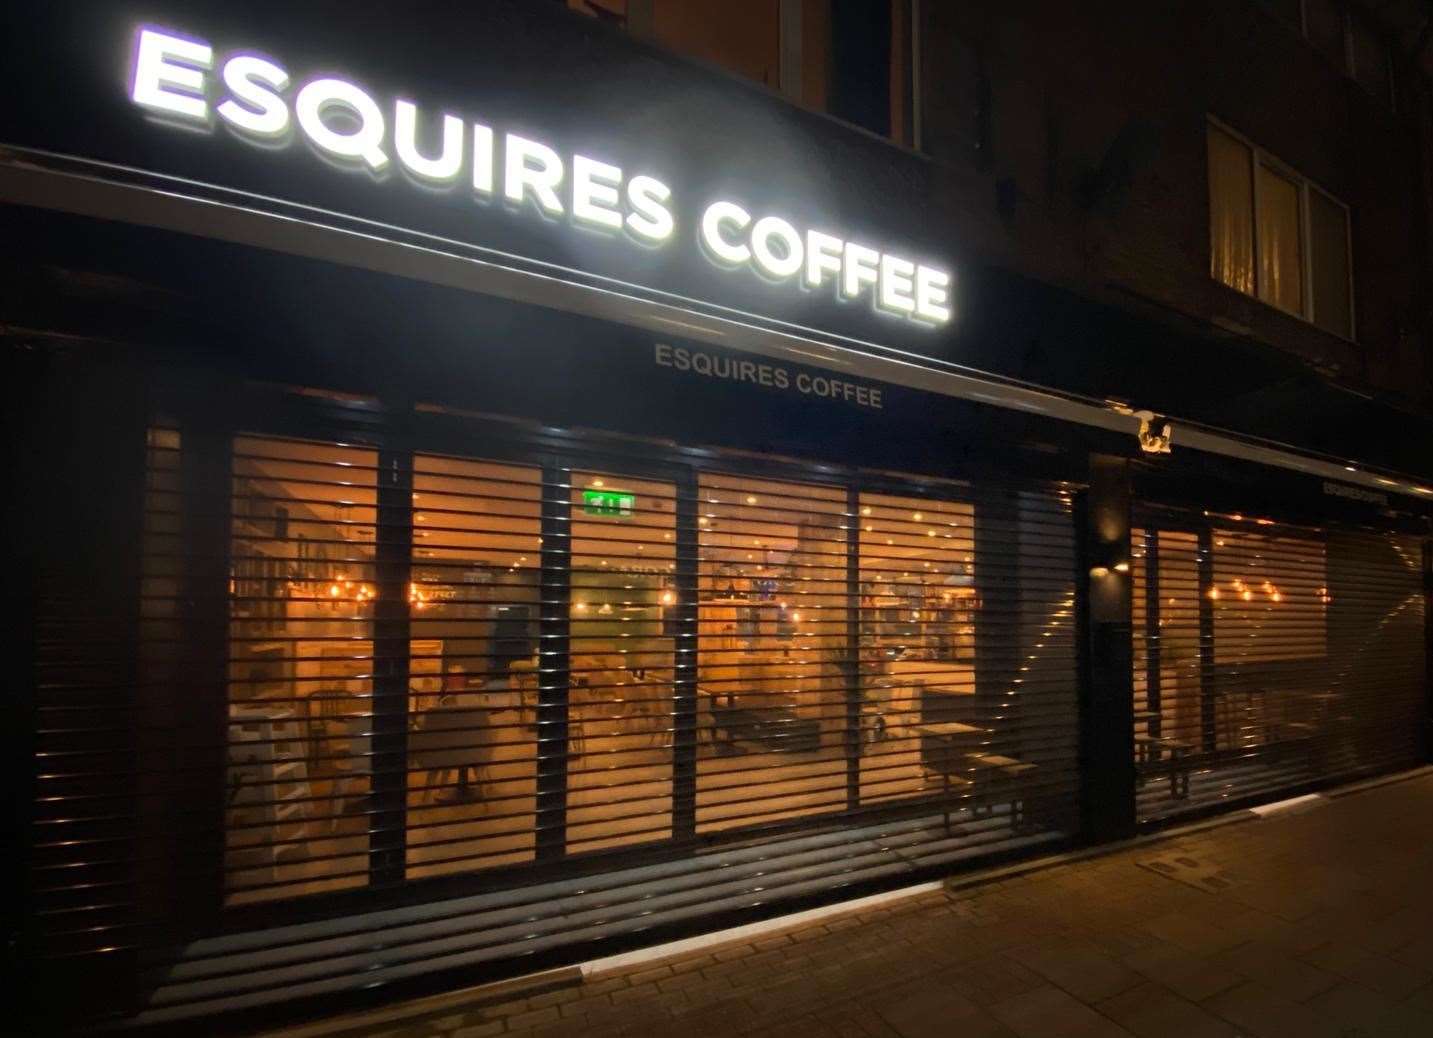 Esquires Coffee has opened up a new branch in Crayford just two miles away from its partner in Dartford High Street